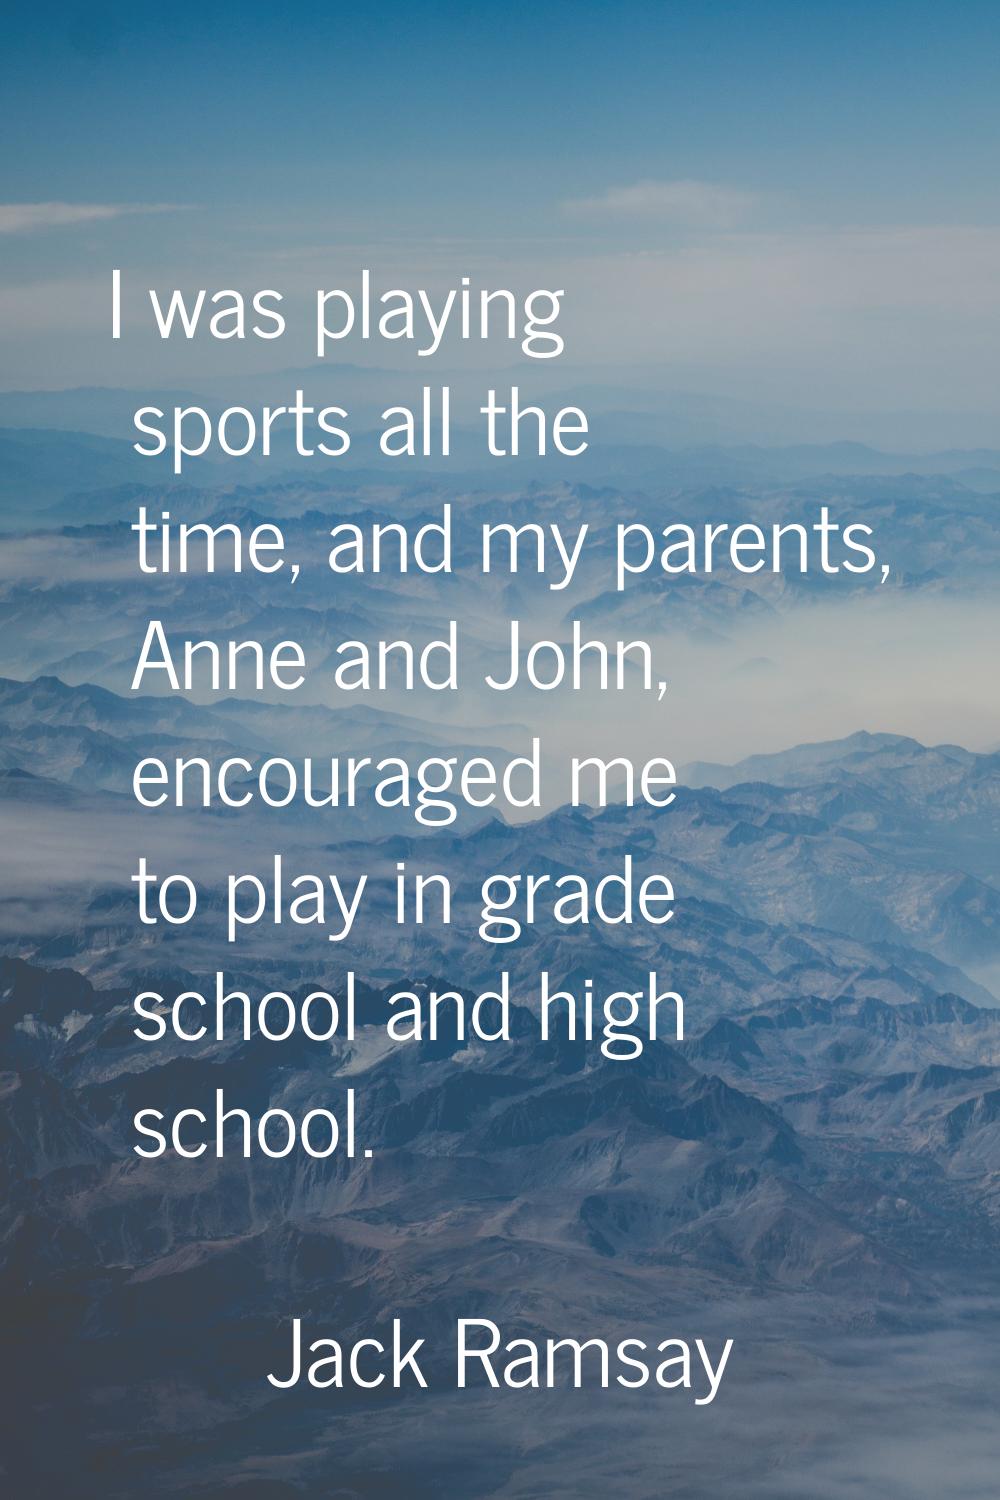 I was playing sports all the time, and my parents, Anne and John, encouraged me to play in grade sc